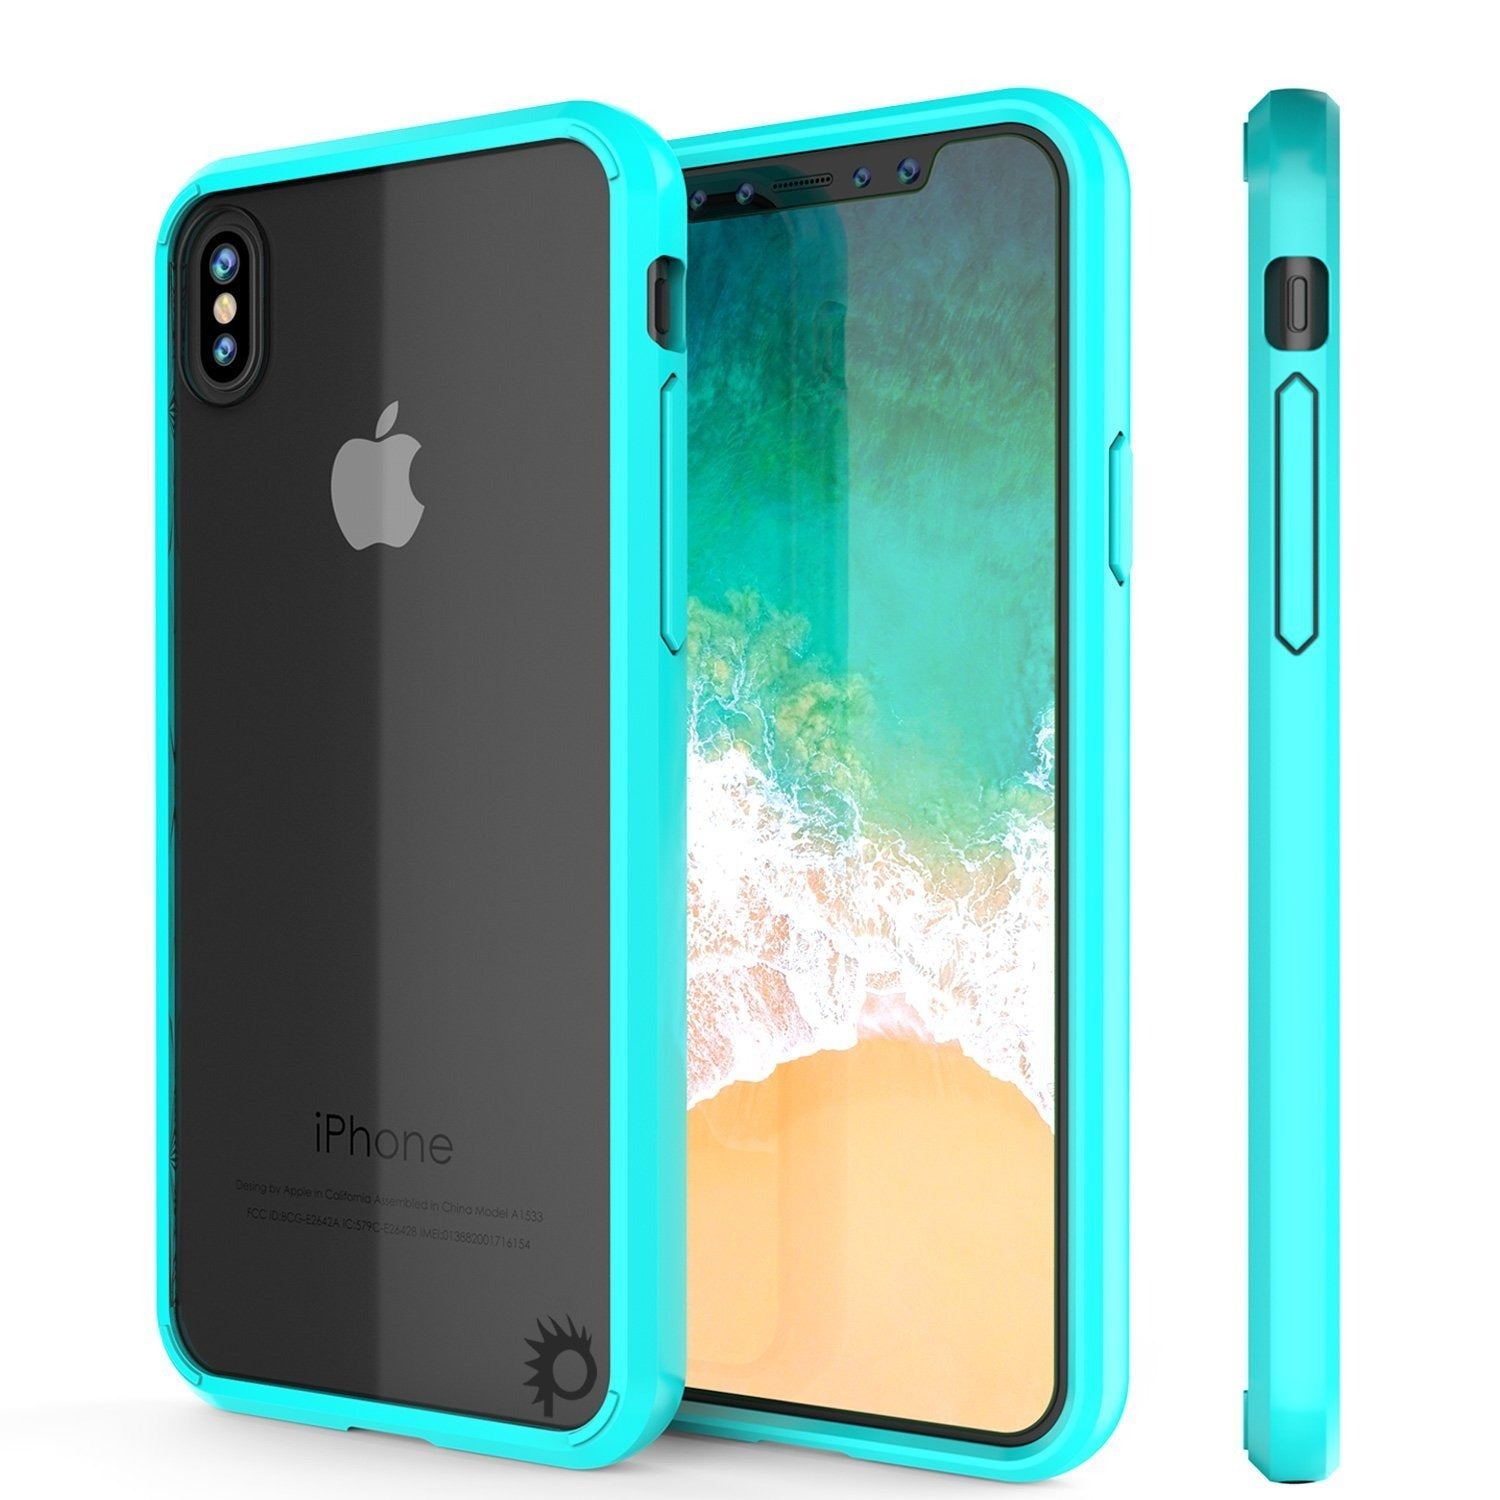 iPhone XR Case, PUNKcase [Lucid 2.0 Series] [Slim Fit] Armor Cover [Teal]